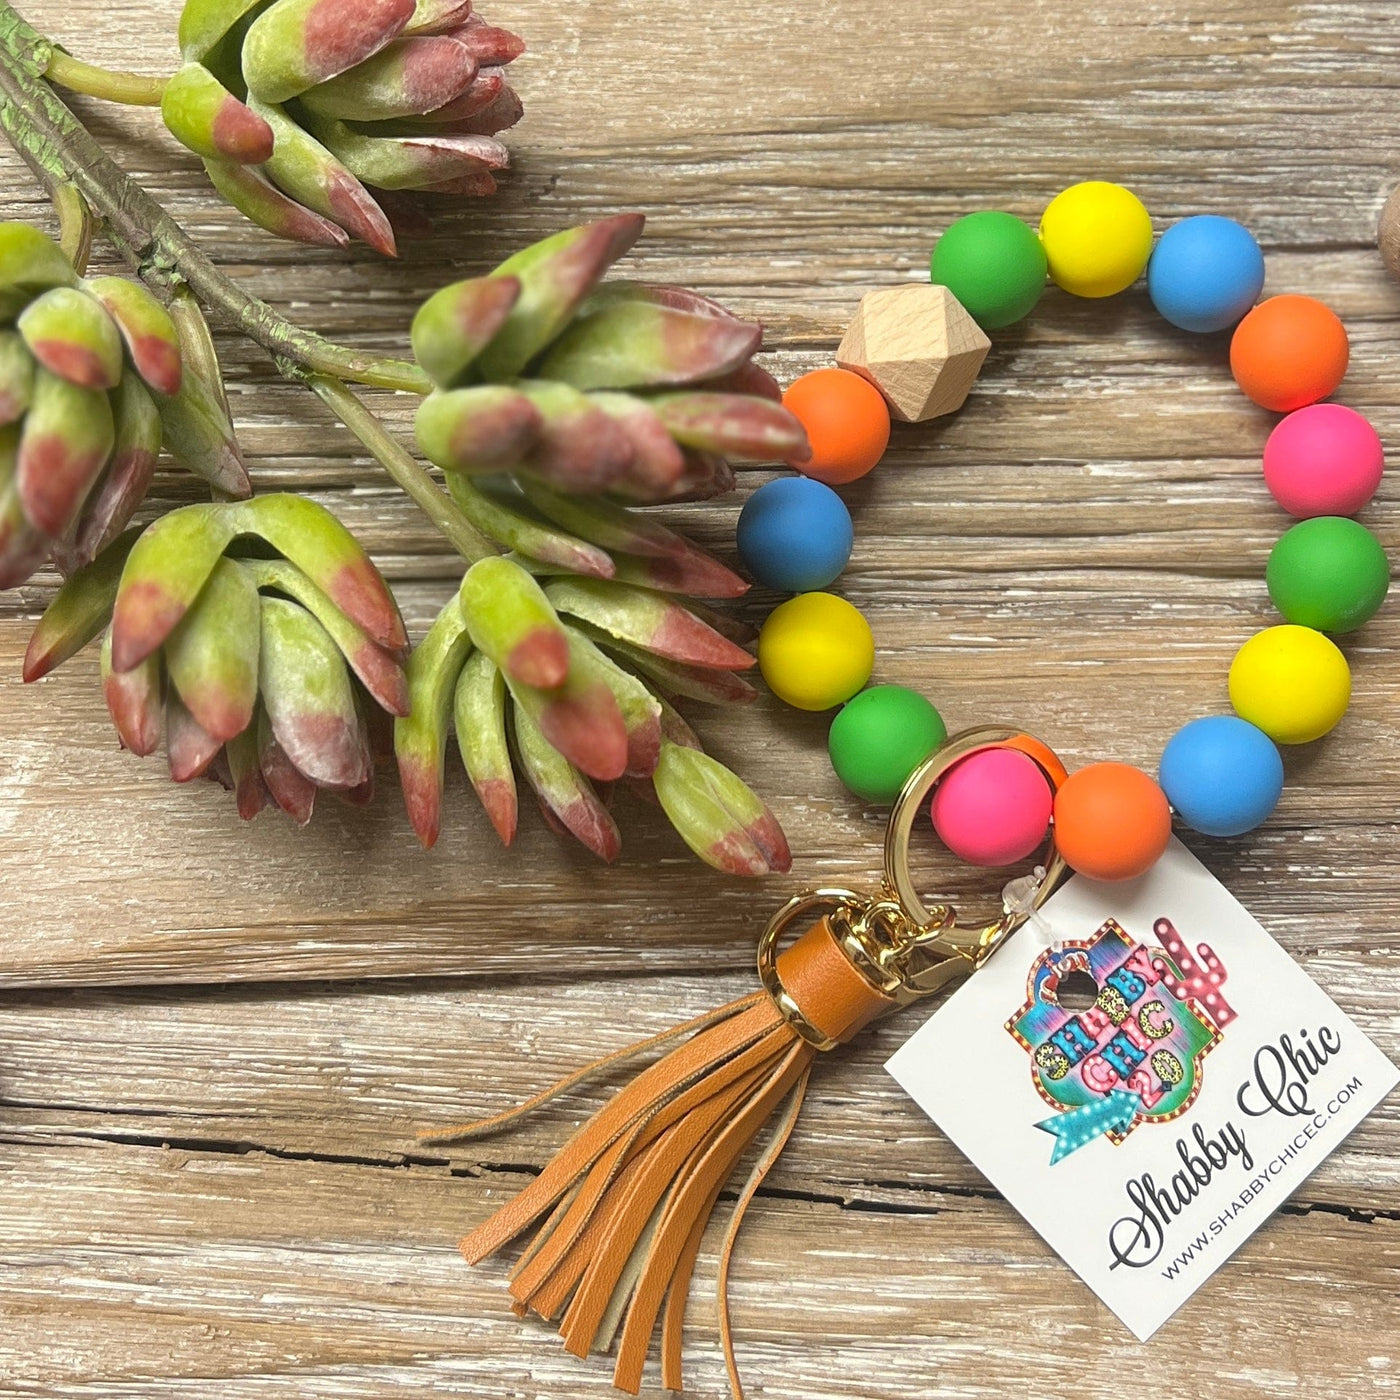 Beaded Bracelet Key Ring - Tropical Vibes Shabby Chic Boutique and Tanning Salon